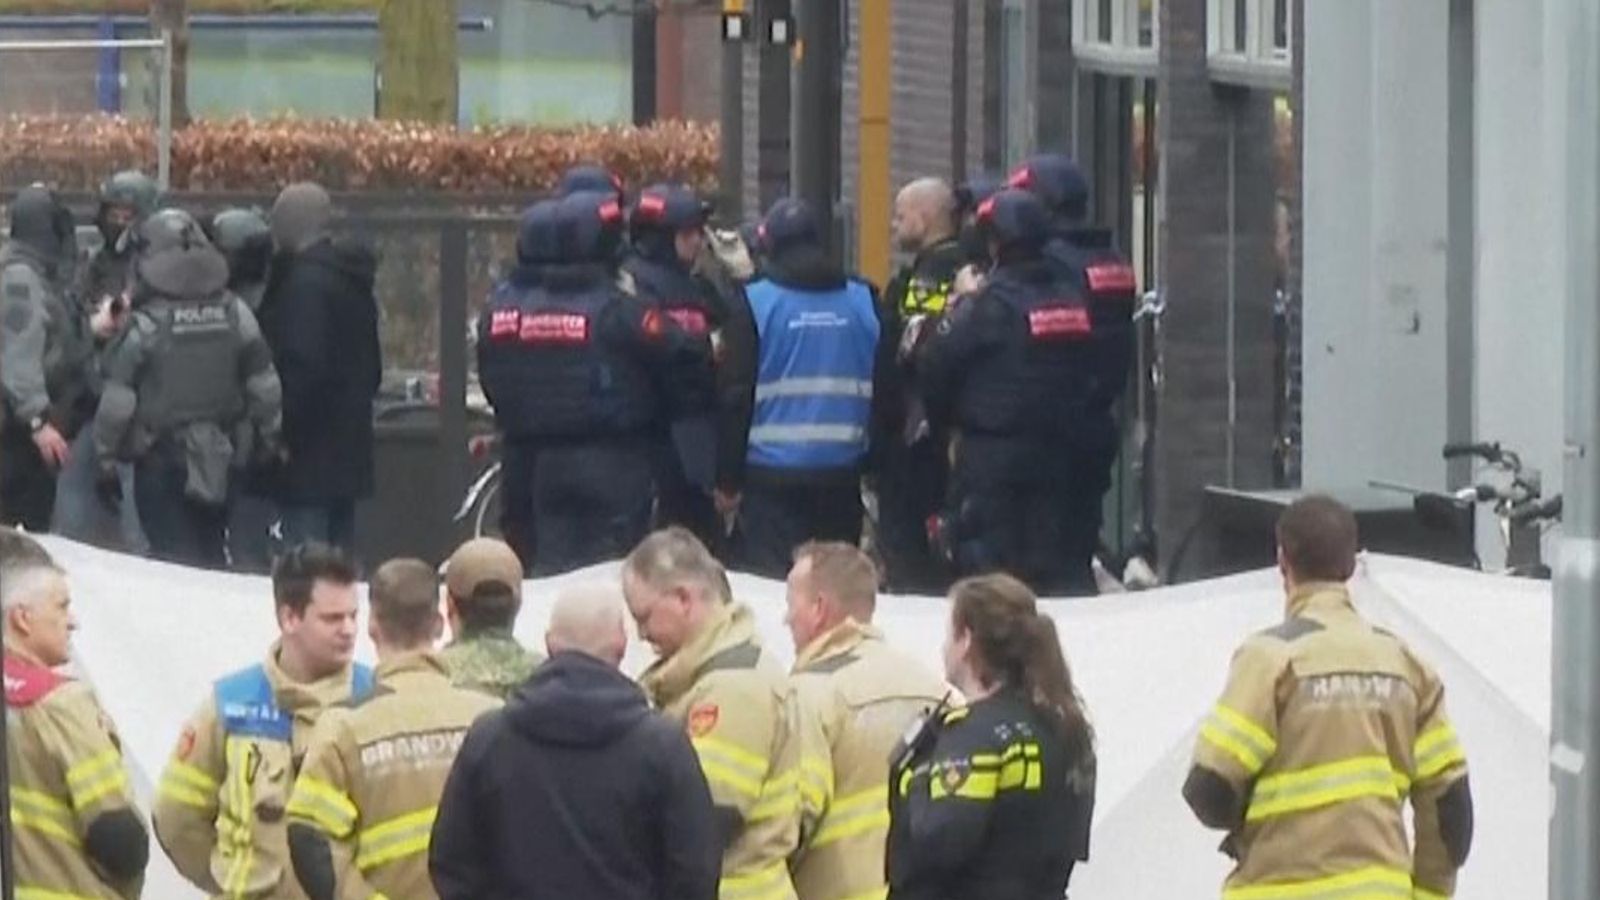 Hostage situation in nightclub in the Netherlands involving armed man with weapons and explosives